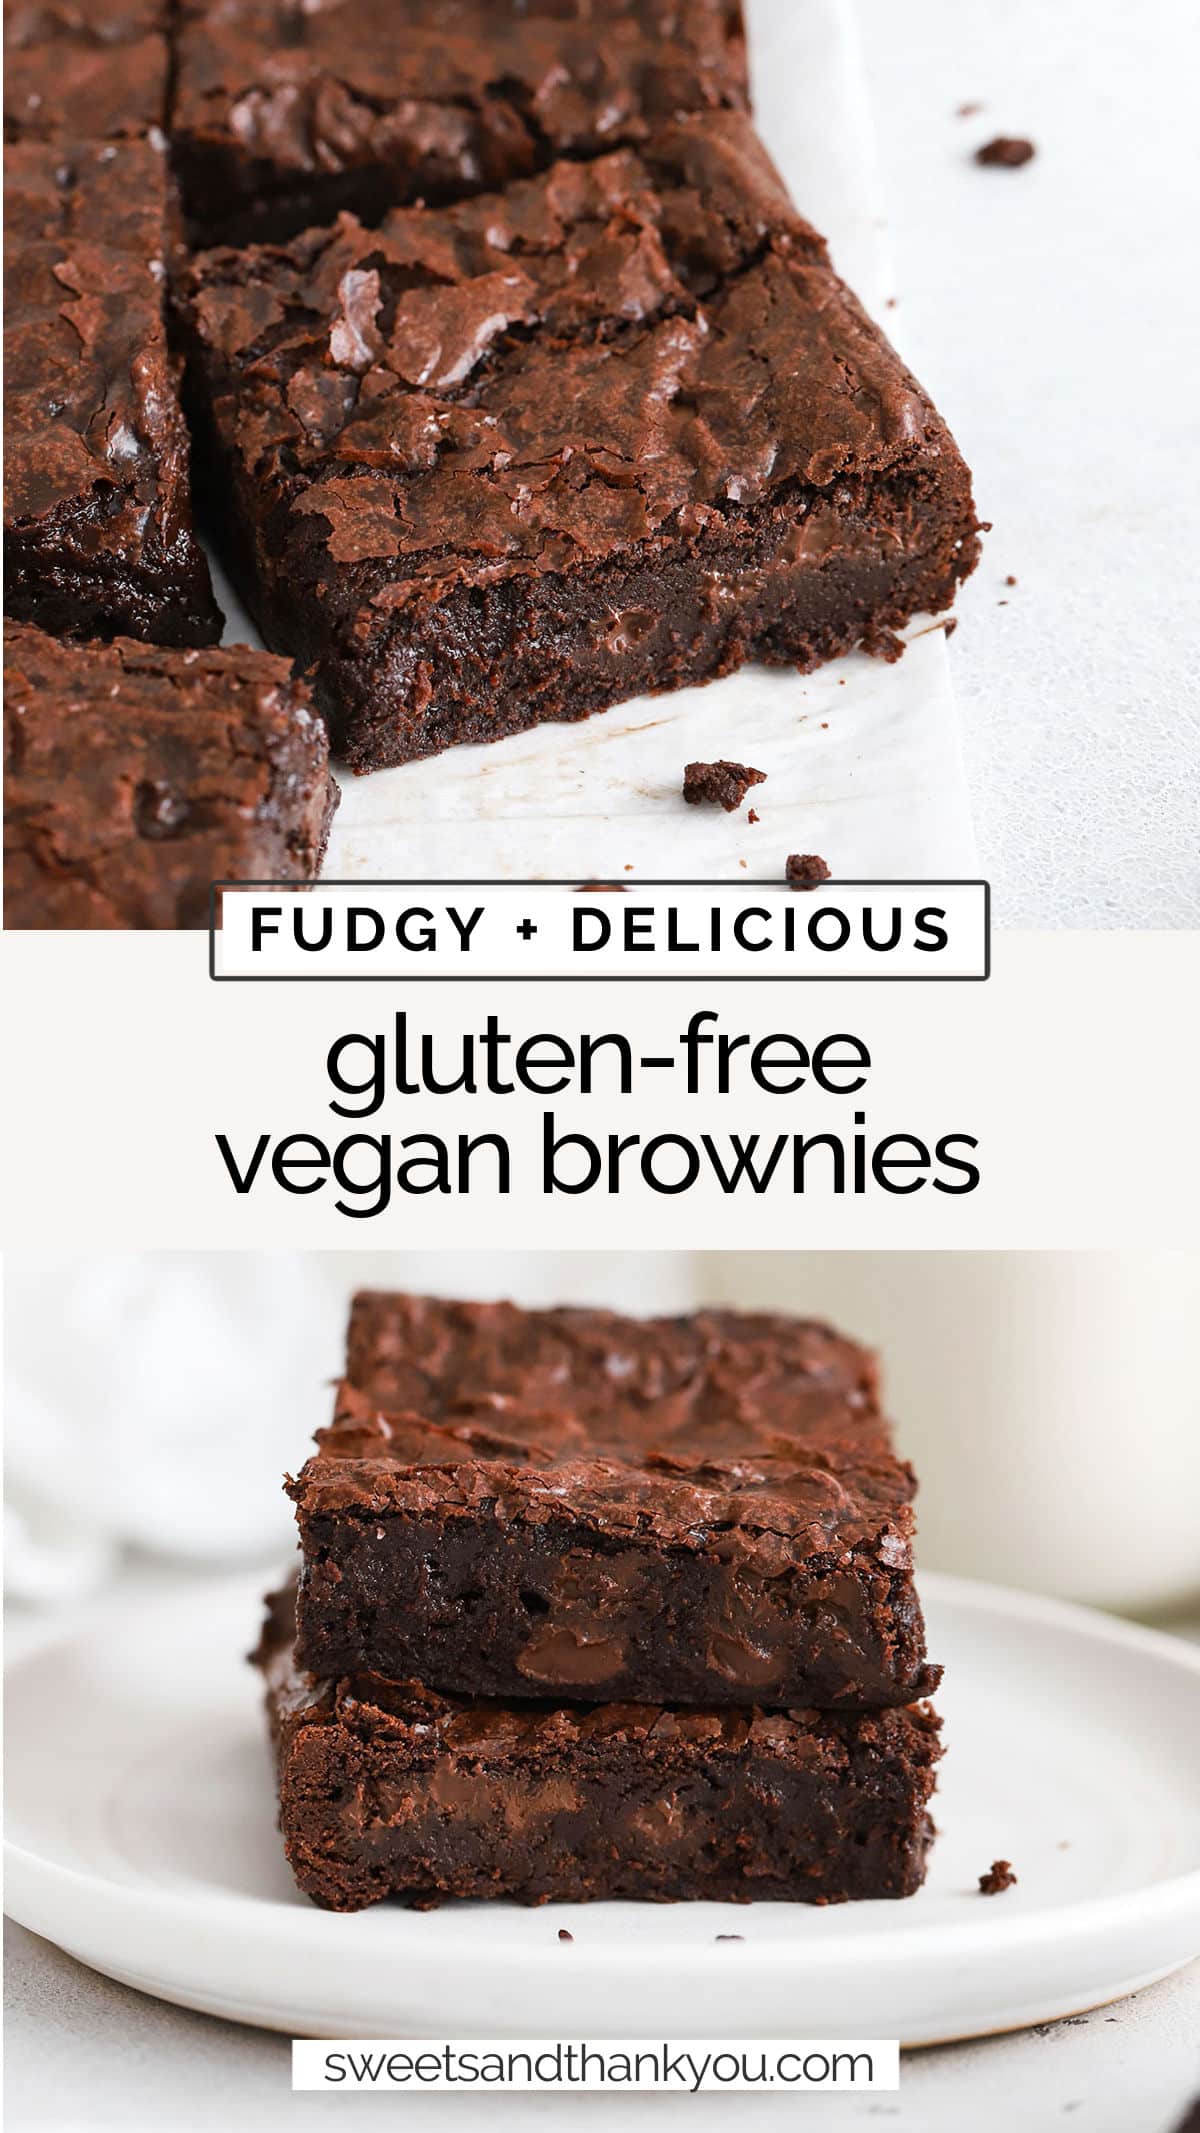 This Gluten-Free Vegan Brownies recipe is fudgy, chocolatey, and has that signature glossy top that looks gorgeous. (no flax eggs & no aquafaba in sight!) / gluten free vegan brownie recipe / the best vegan brownies / fudgy vegan brownies recipe / vegan brownies no flax eggs / vegan brownies without flax / vegan brownies without aquafaba / gluten-free brownies without eggs / gluten-free brownies no eggs / vegan gluten free brownies / vegan brownies gluten free / chewy vegan brownies